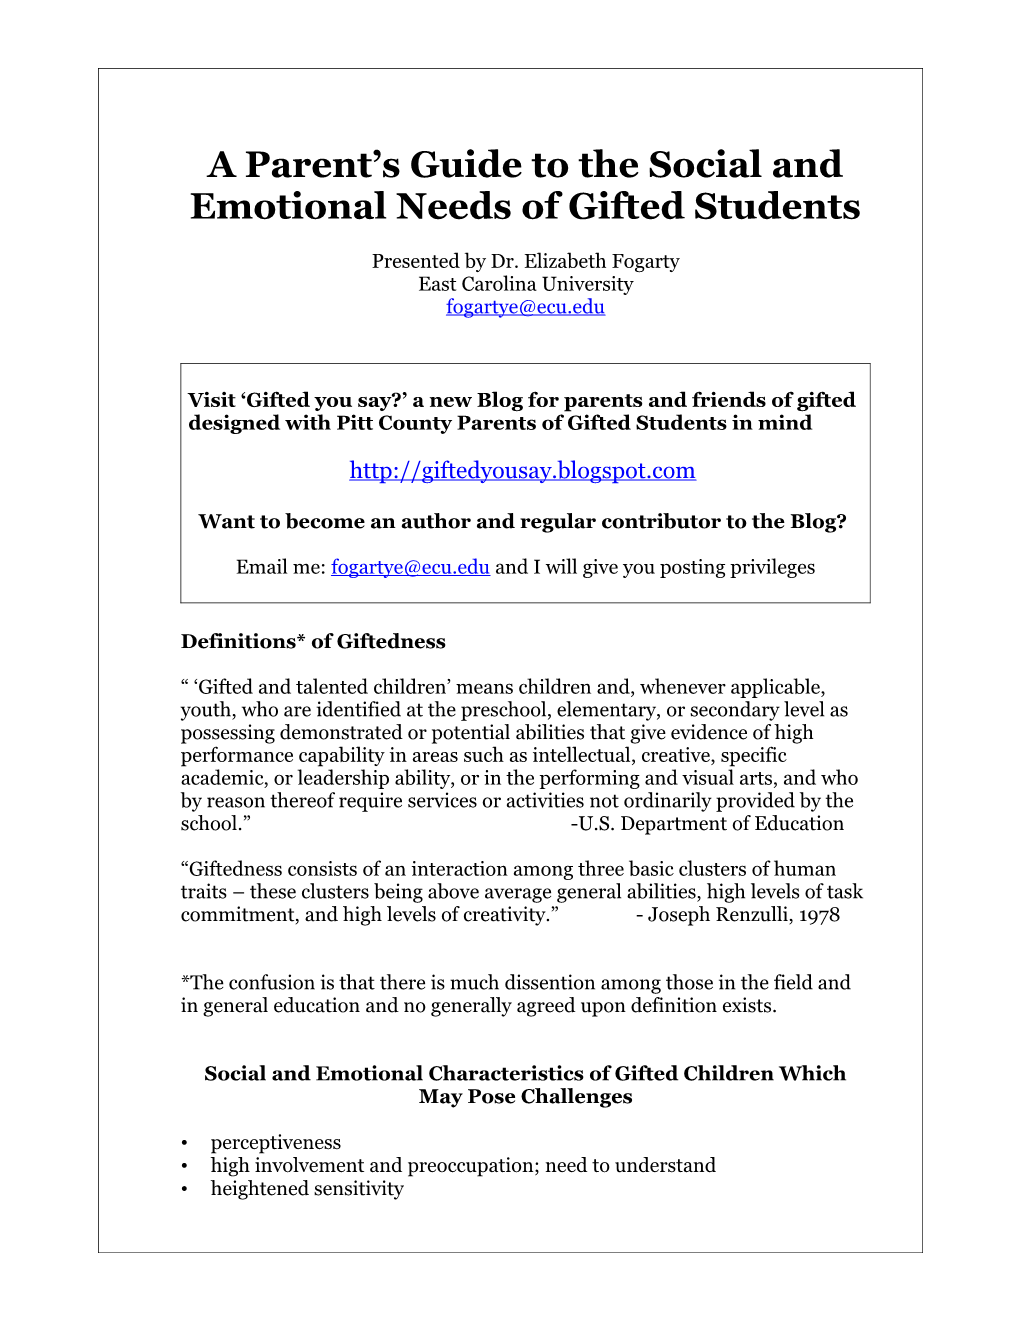 Social and Emotional Characteristics of Gifted Children Which May Pose Challenges